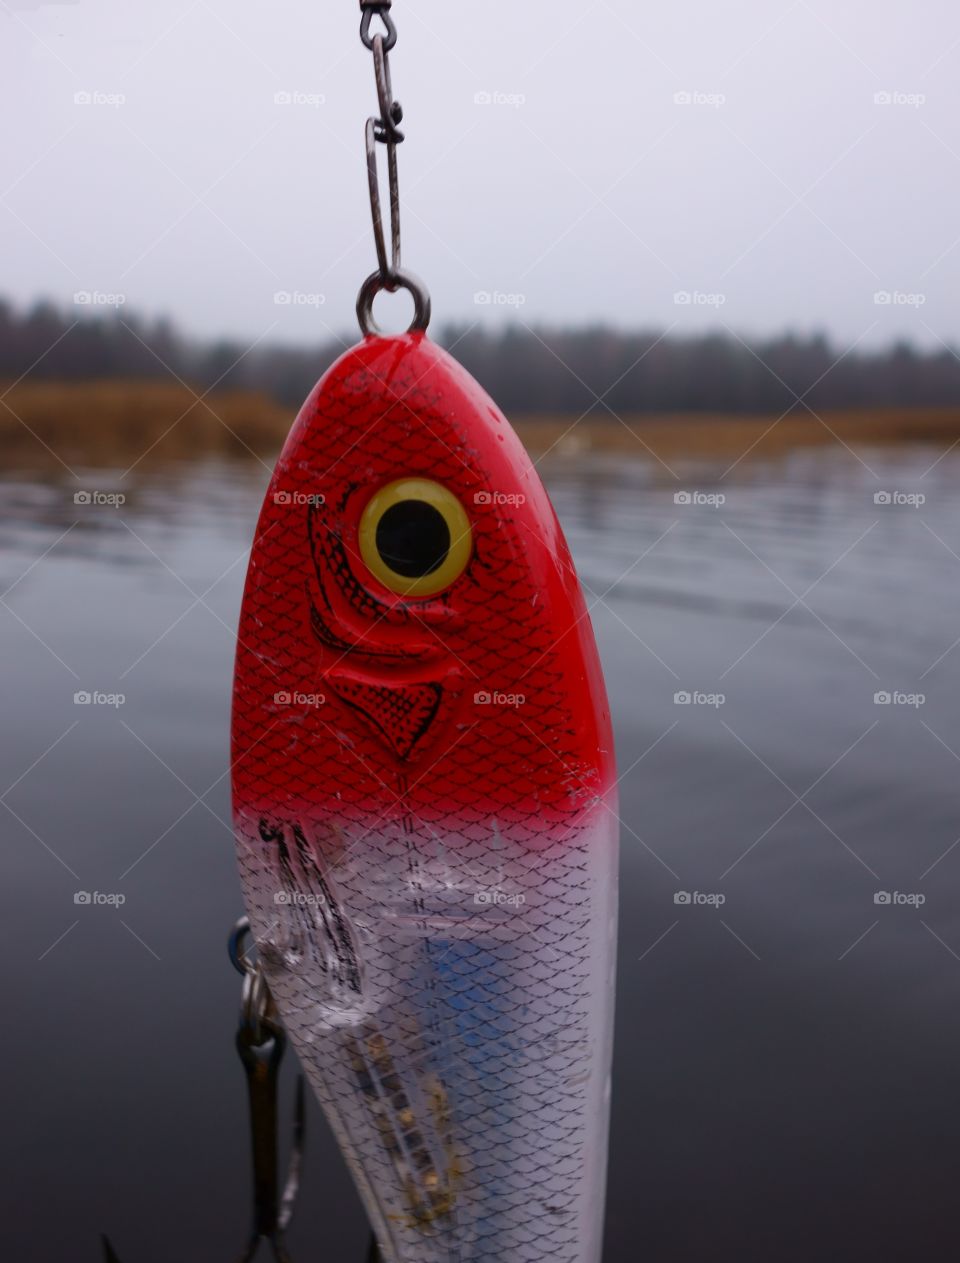 Pike fishing lure. Red and white pike fishing lure in Finnish archipelago.